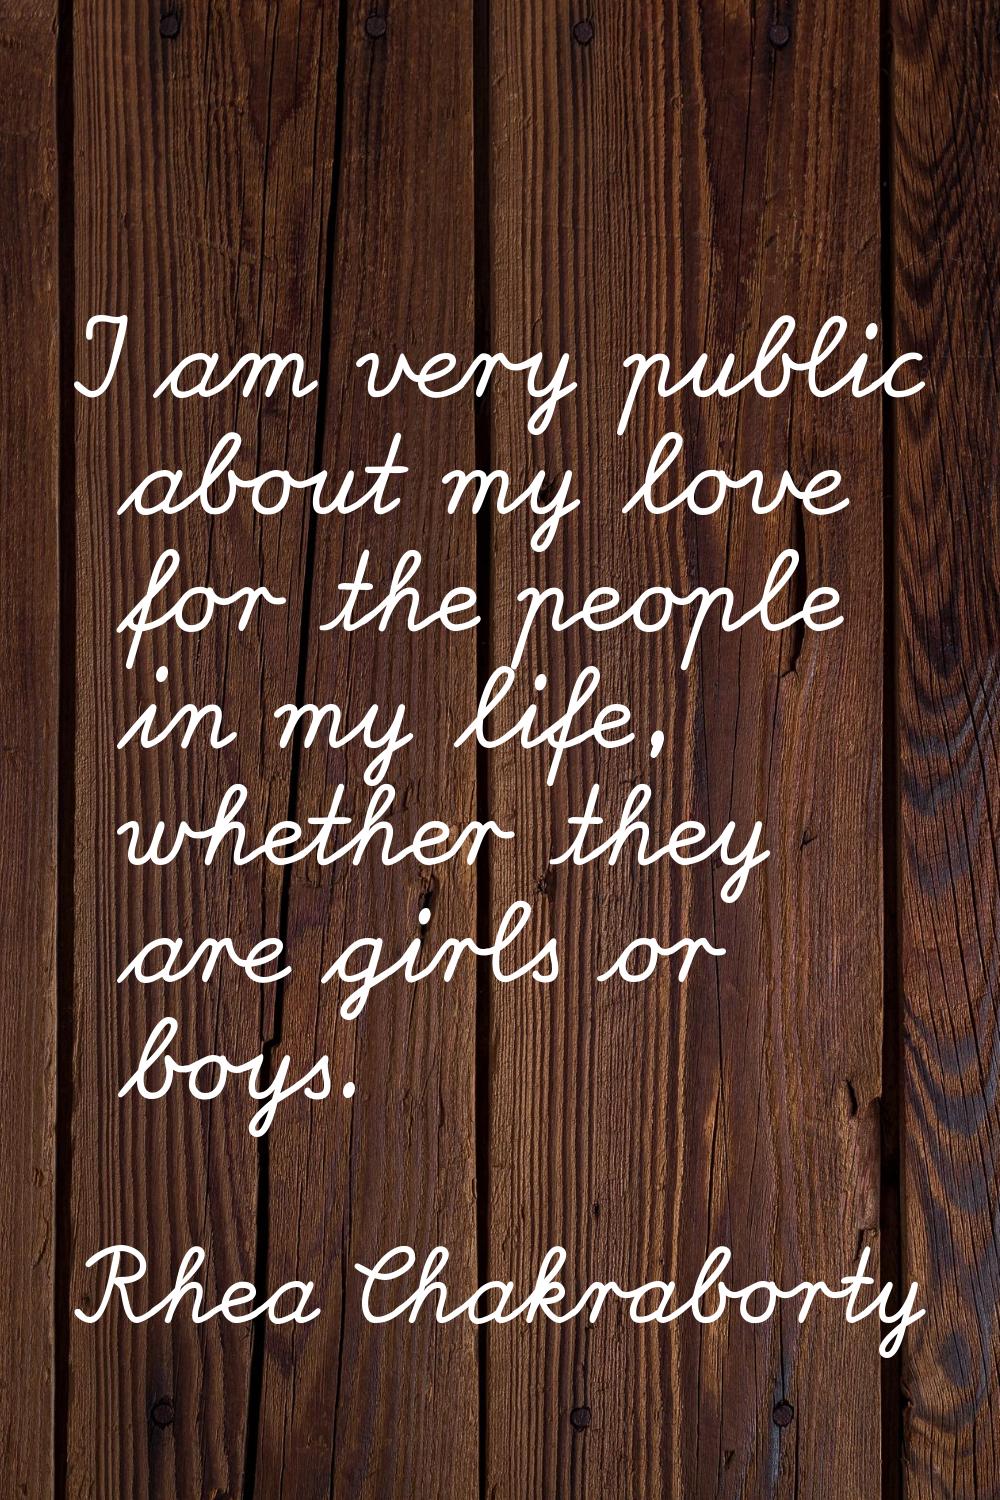 I am very public about my love for the people in my life, whether they are girls or boys.